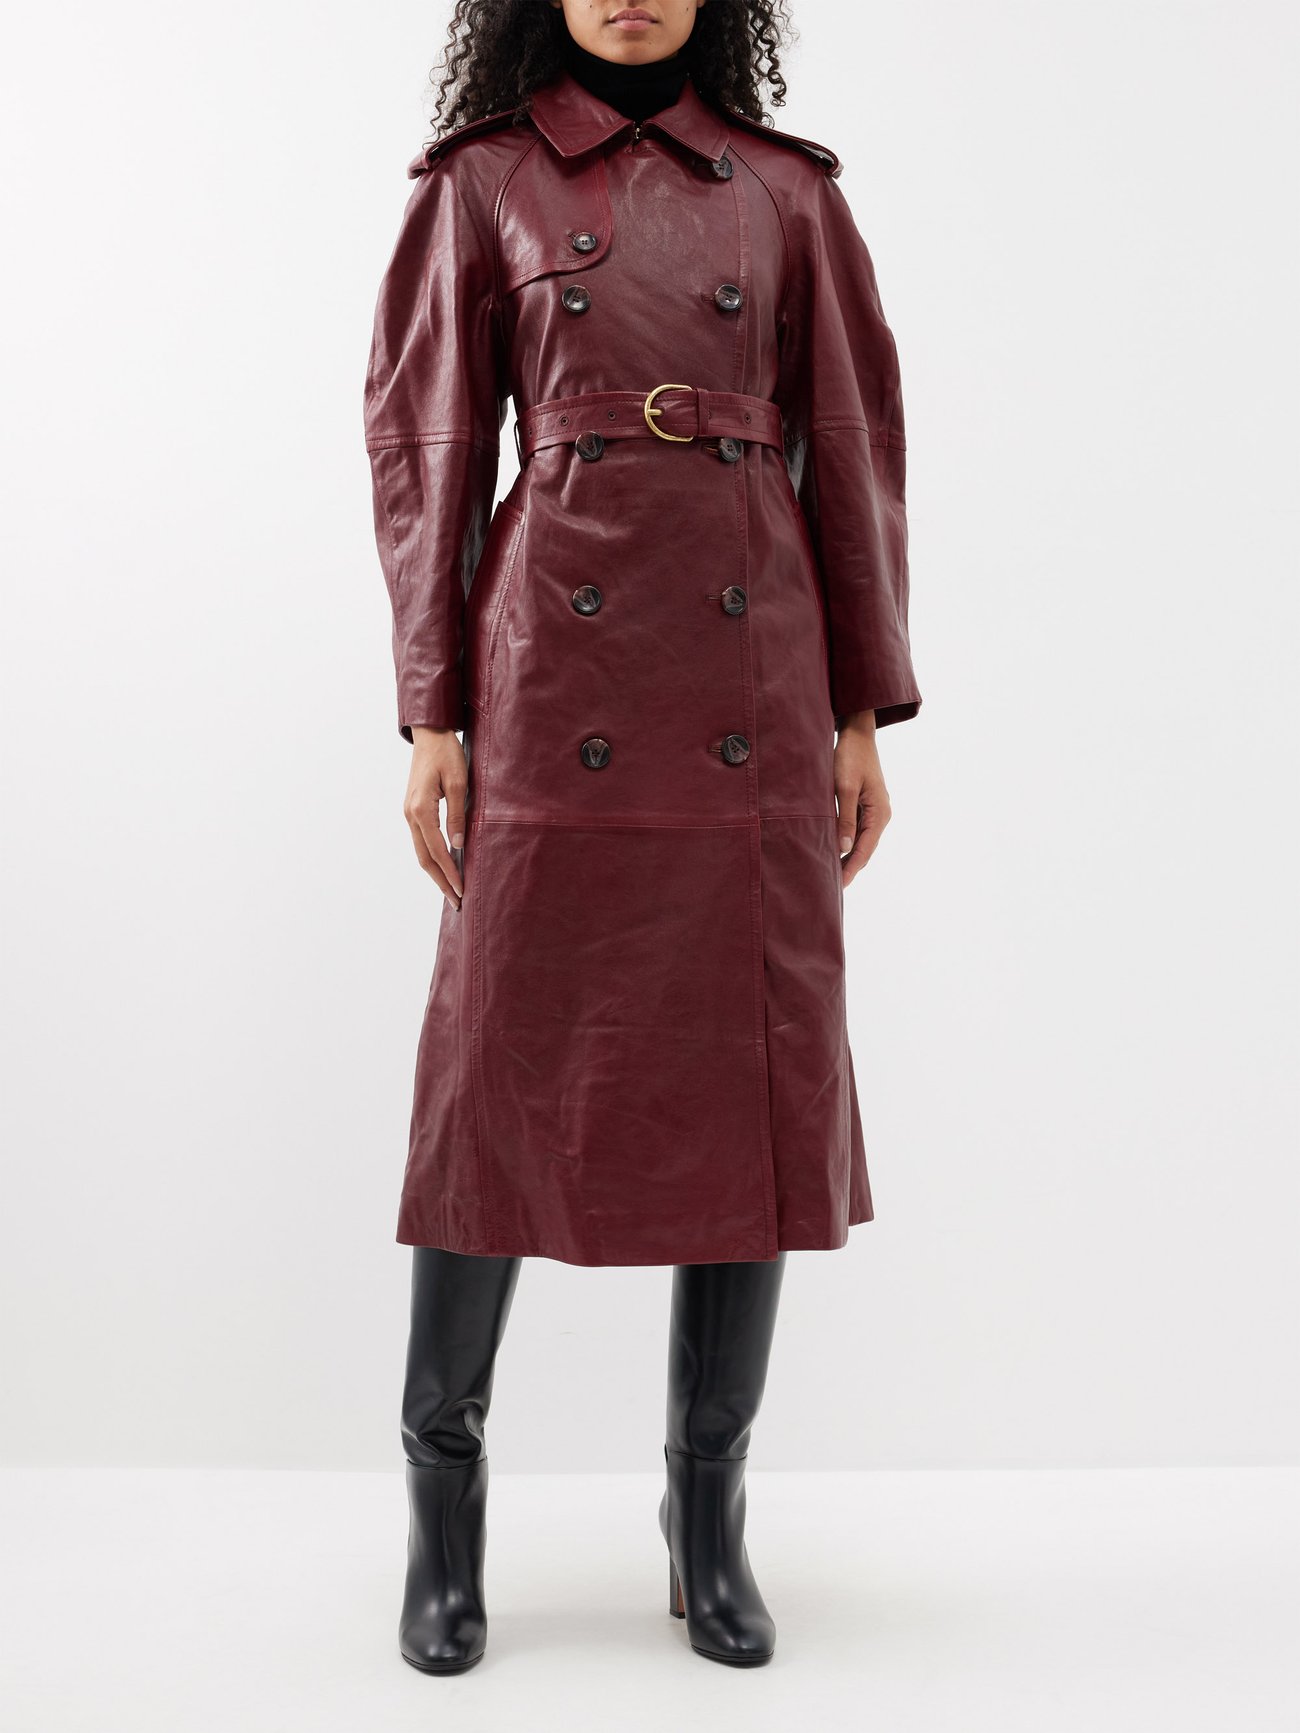 Trending Winter Coats 2023 2024 - Exude bohemian cool with Ulla Johnson's burgundy Marlowe trench coat, tailored from butter-soft nappa leather with a lightly waxed finish.